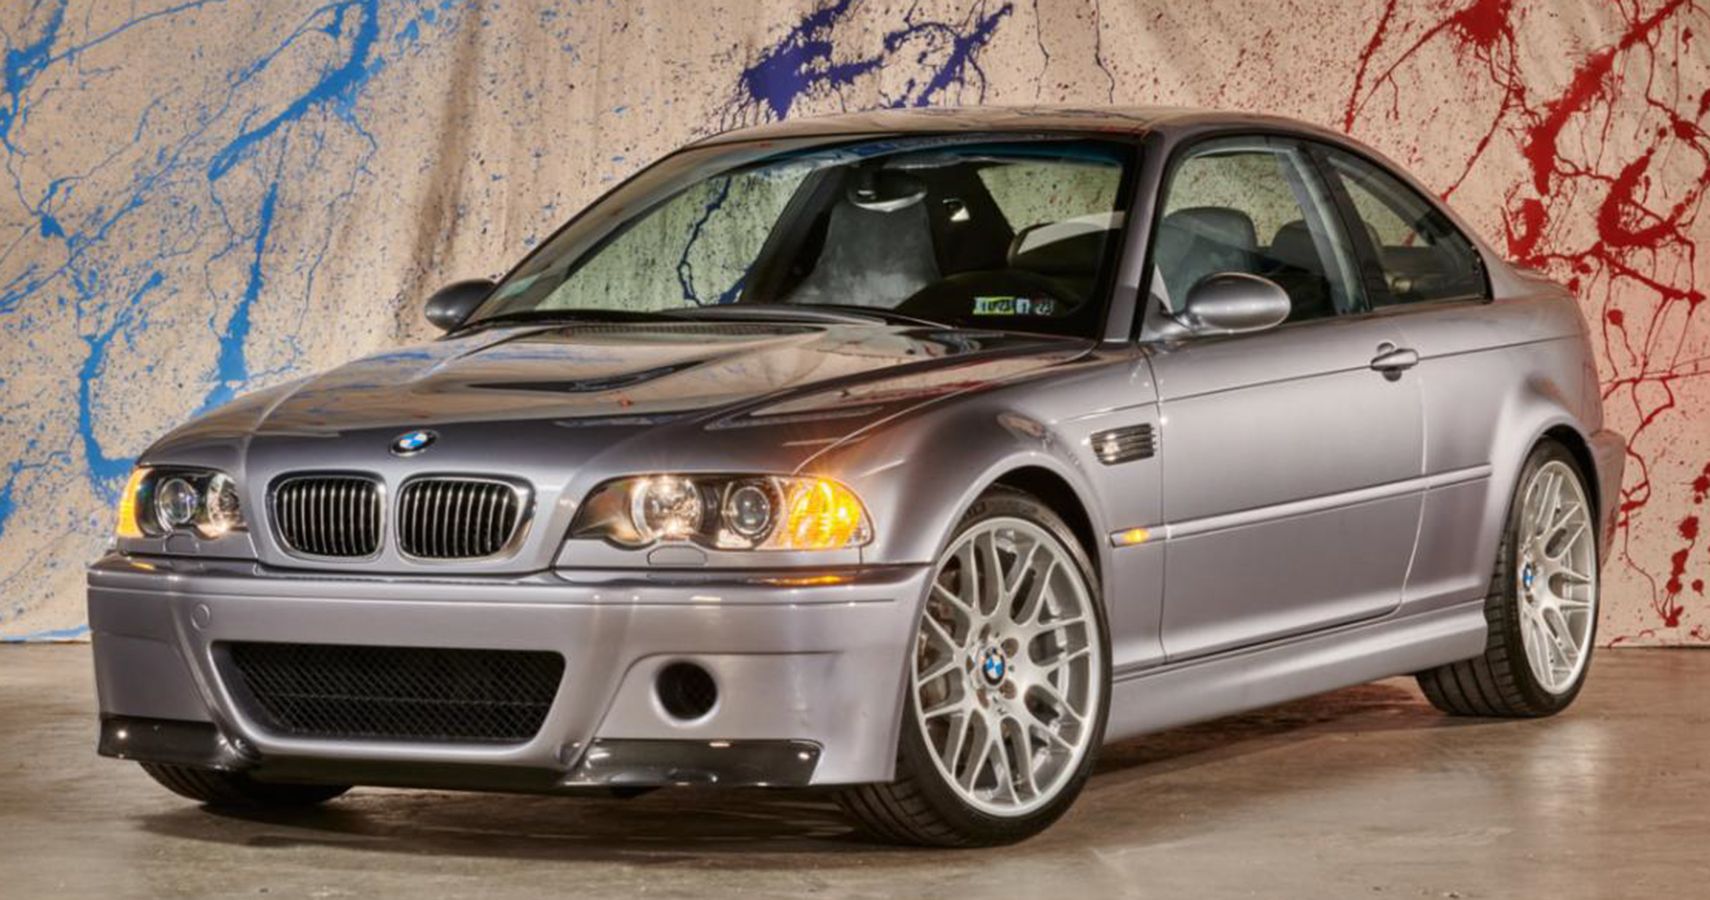  BMW E46 M3 CSL one of handful of CSL in US